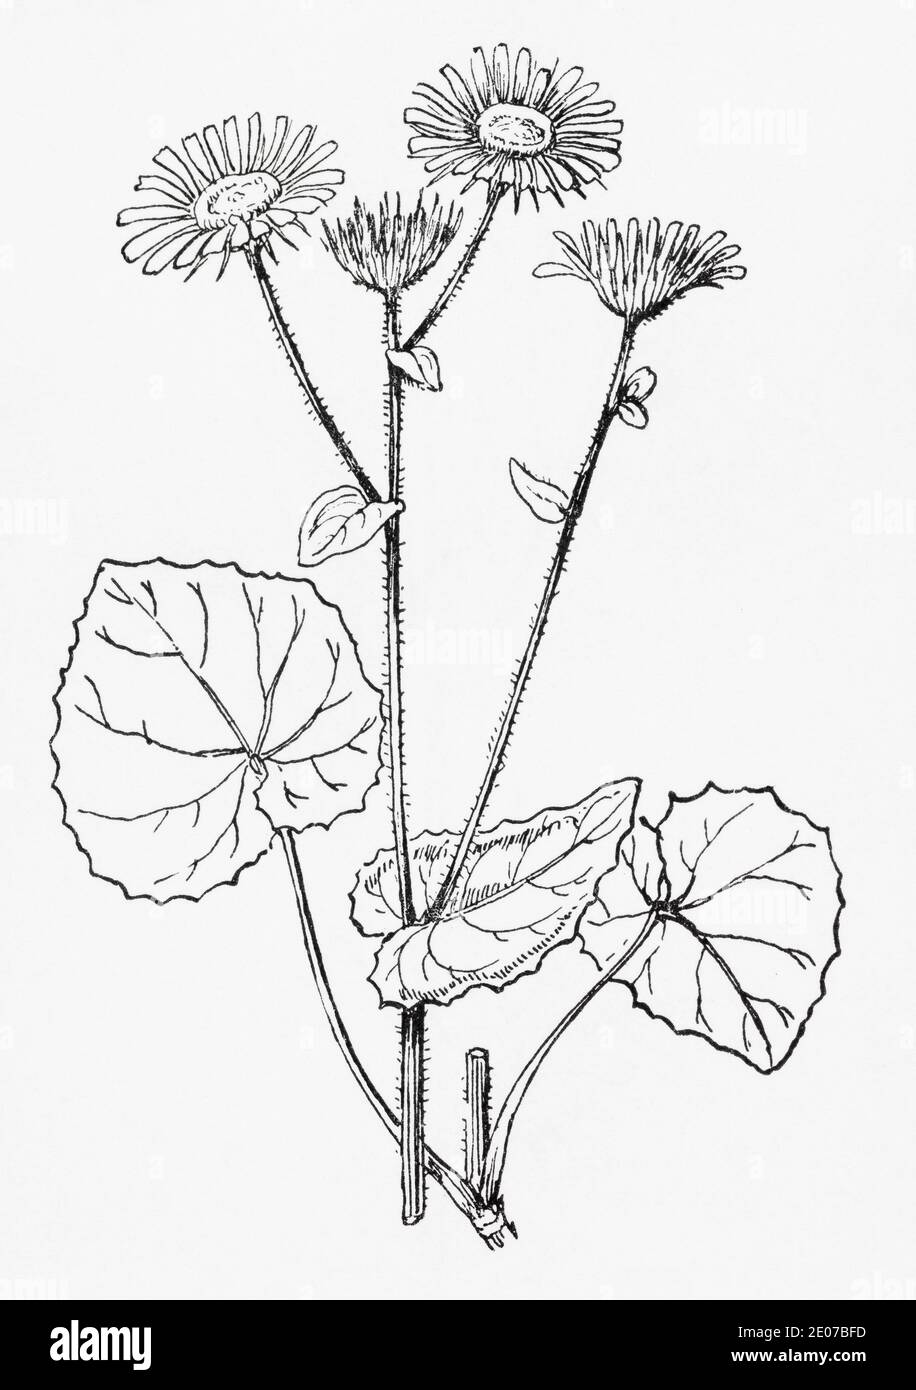 Old botanical illustration engraving of Leopard's Bane / Doronicum pardalianches, Doronicum cordatum. Traditional medicinal herbal plant. See Notes Stock Photo